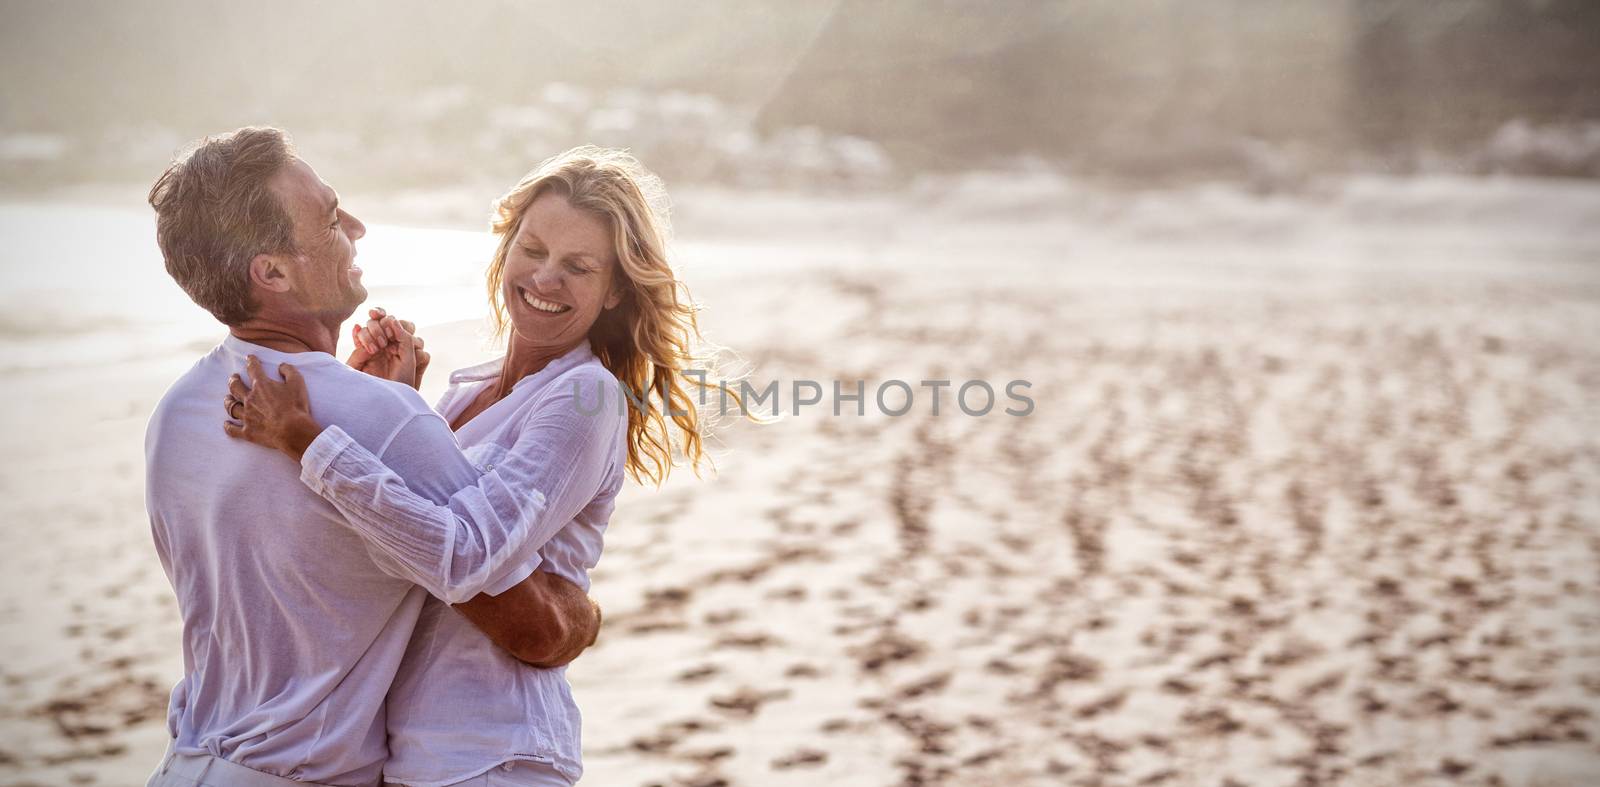 Mature couple having fun together at beach by Wavebreakmedia